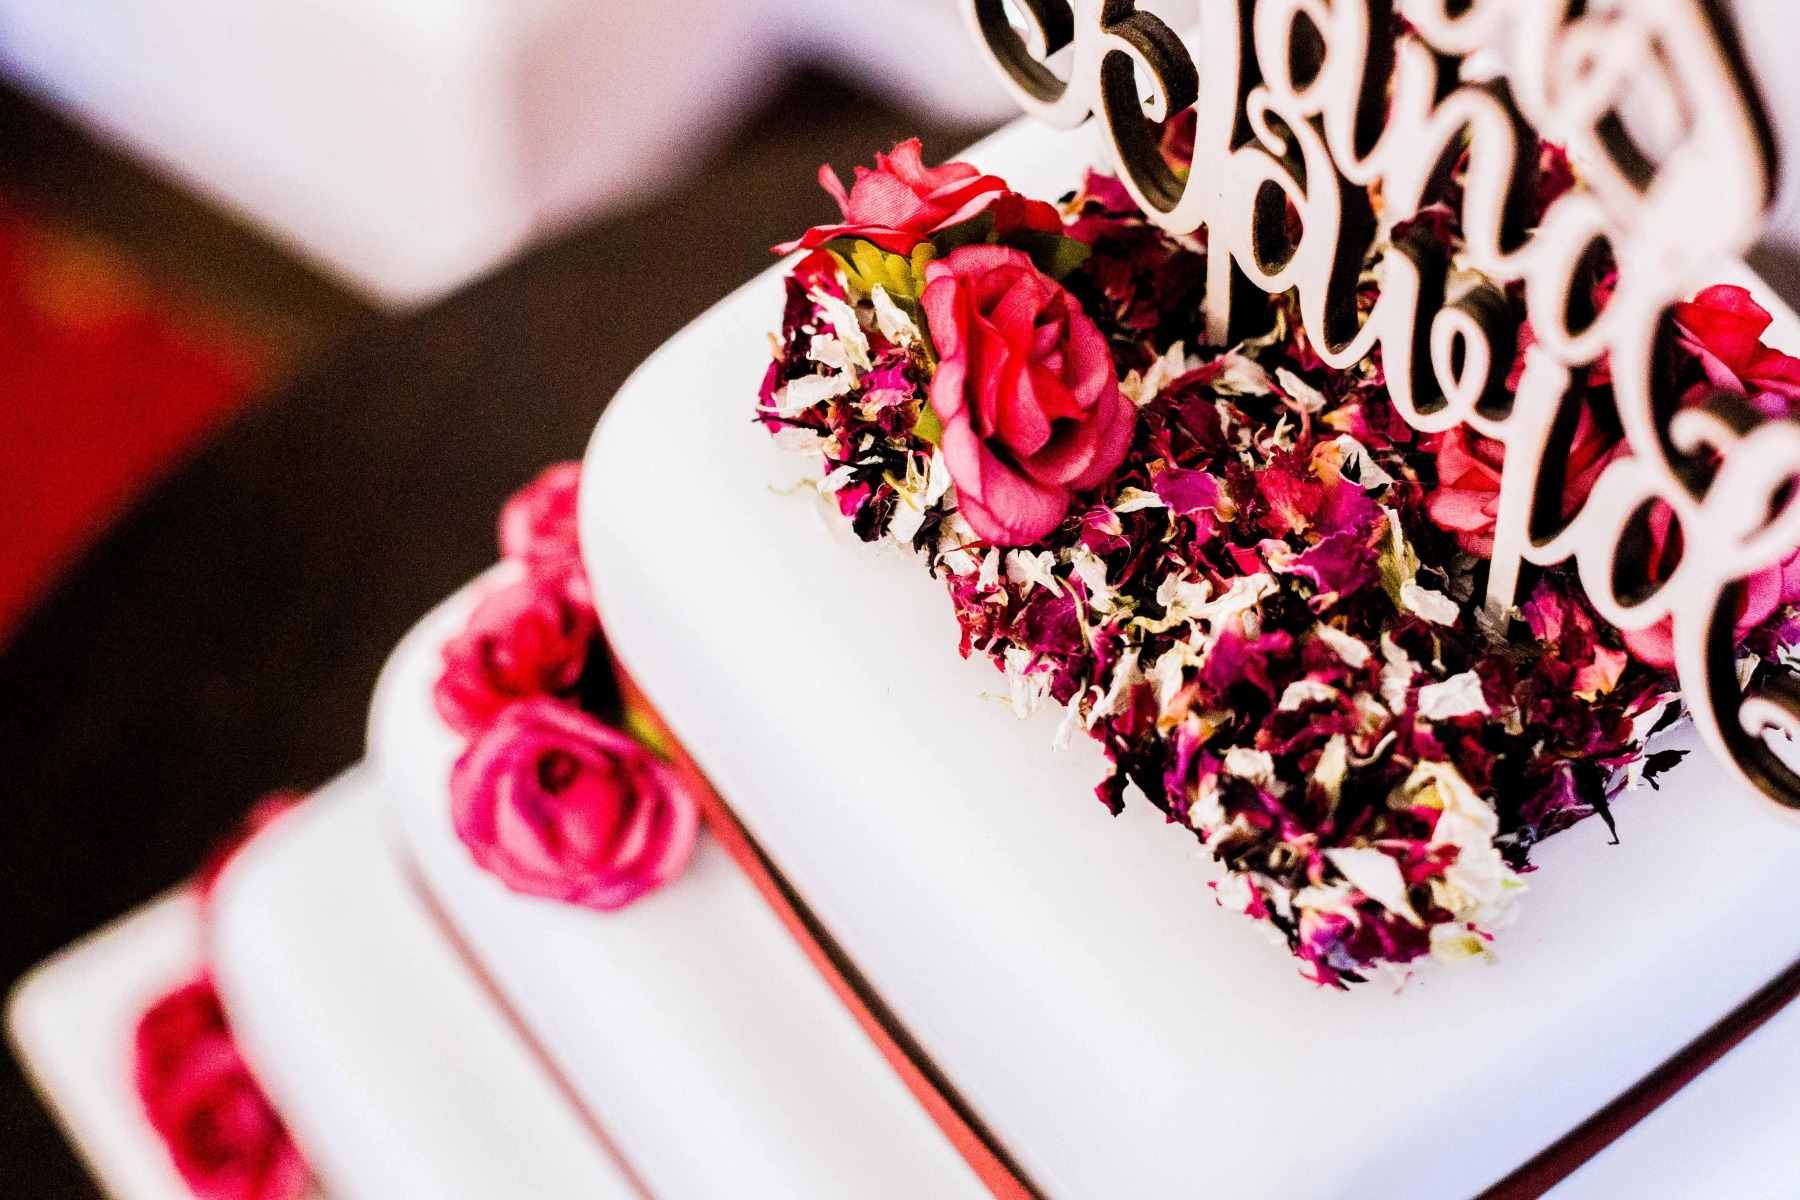 A close up of a white wedding cake with red flowers